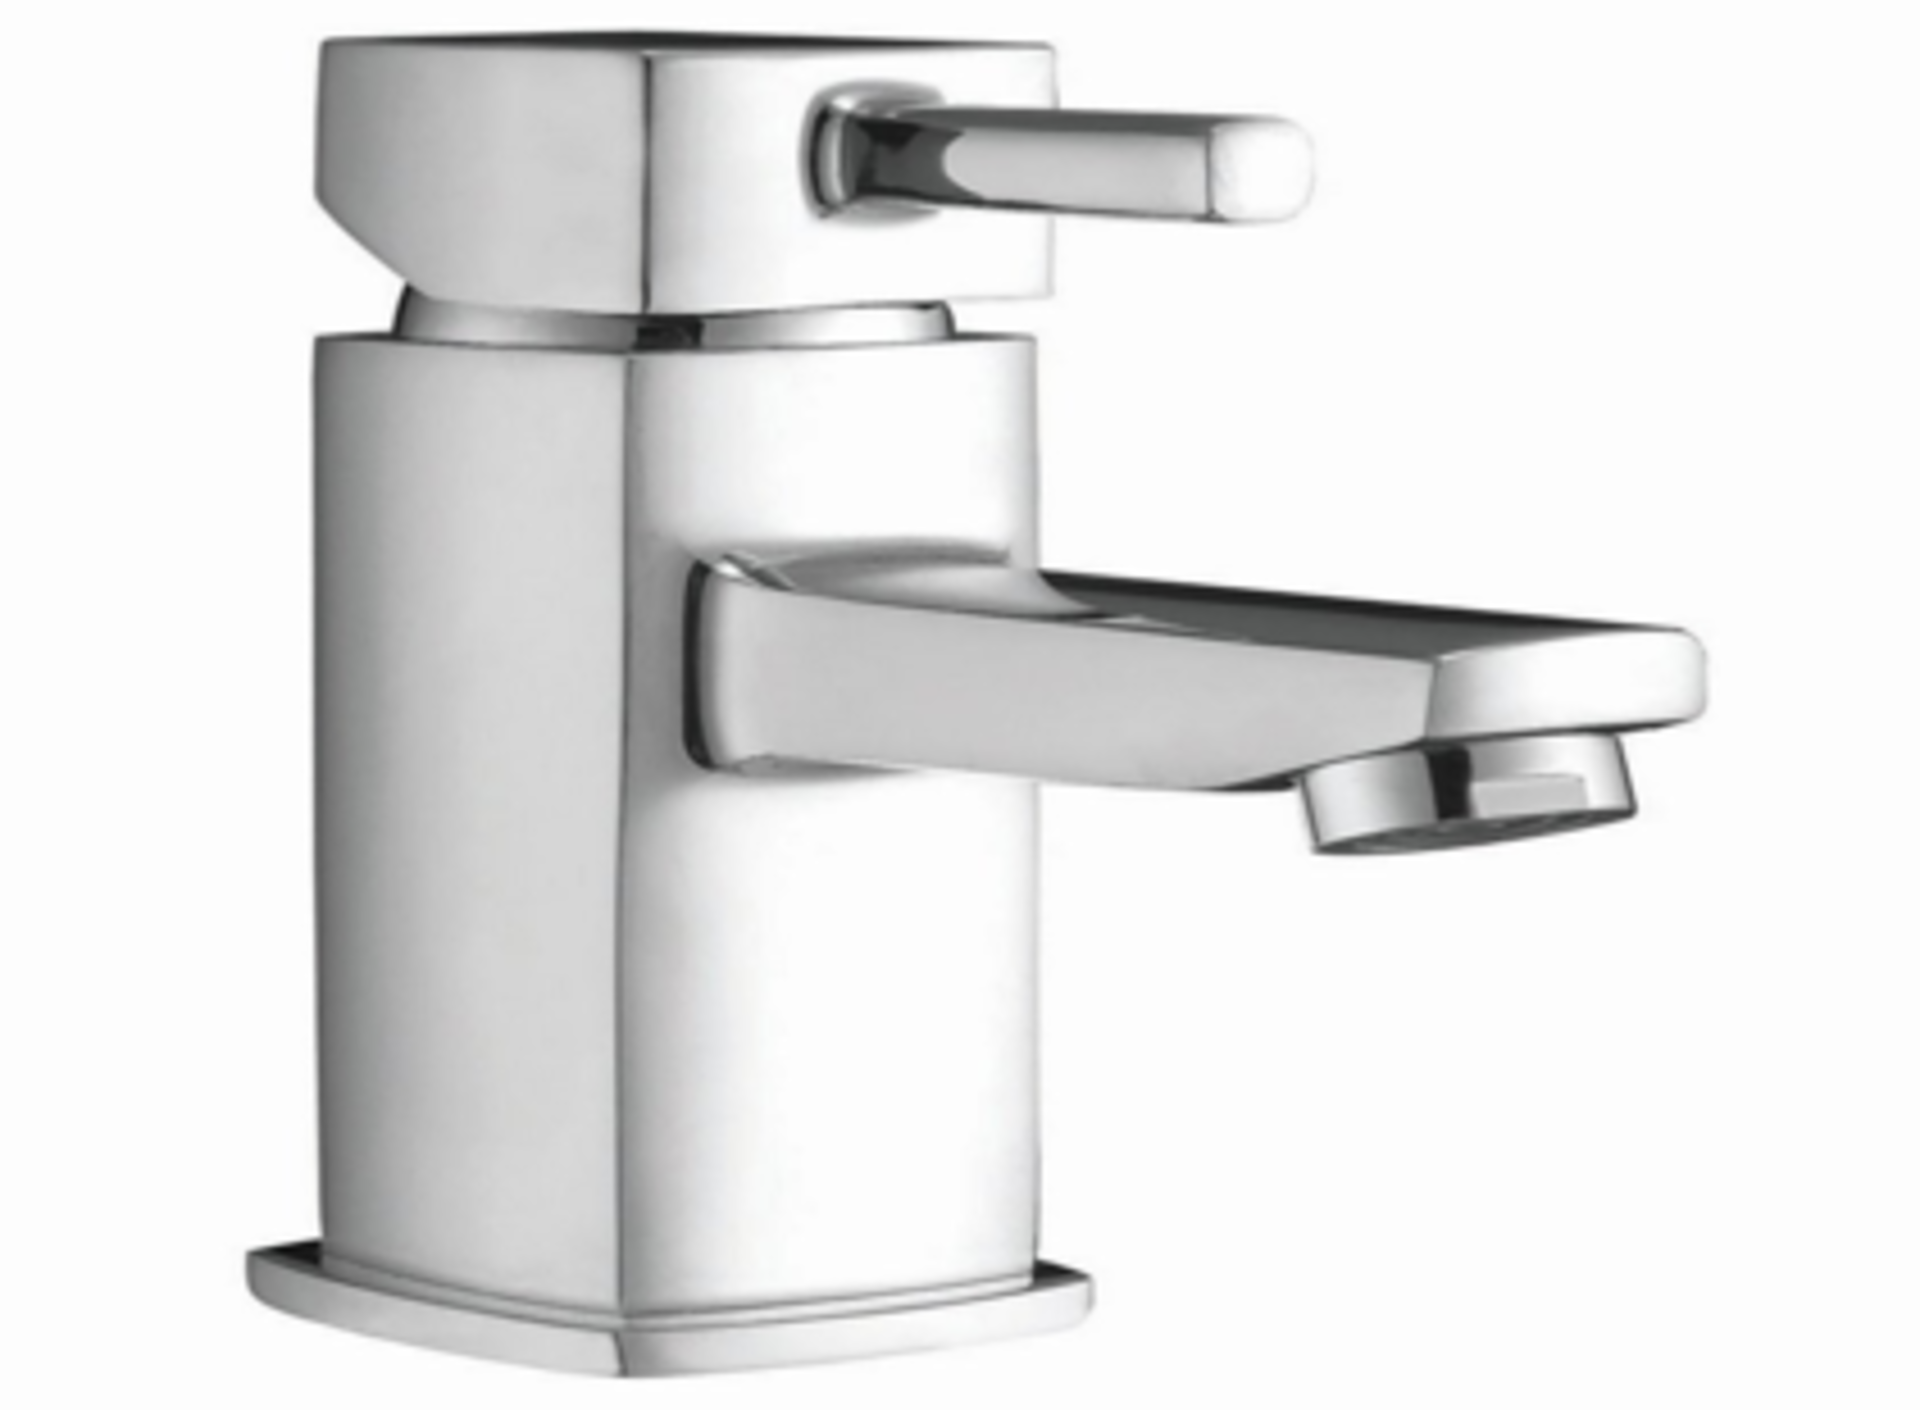 The Emporer Mono Basin Mixer with Click Clack Waste presents a sleek and modern style with square